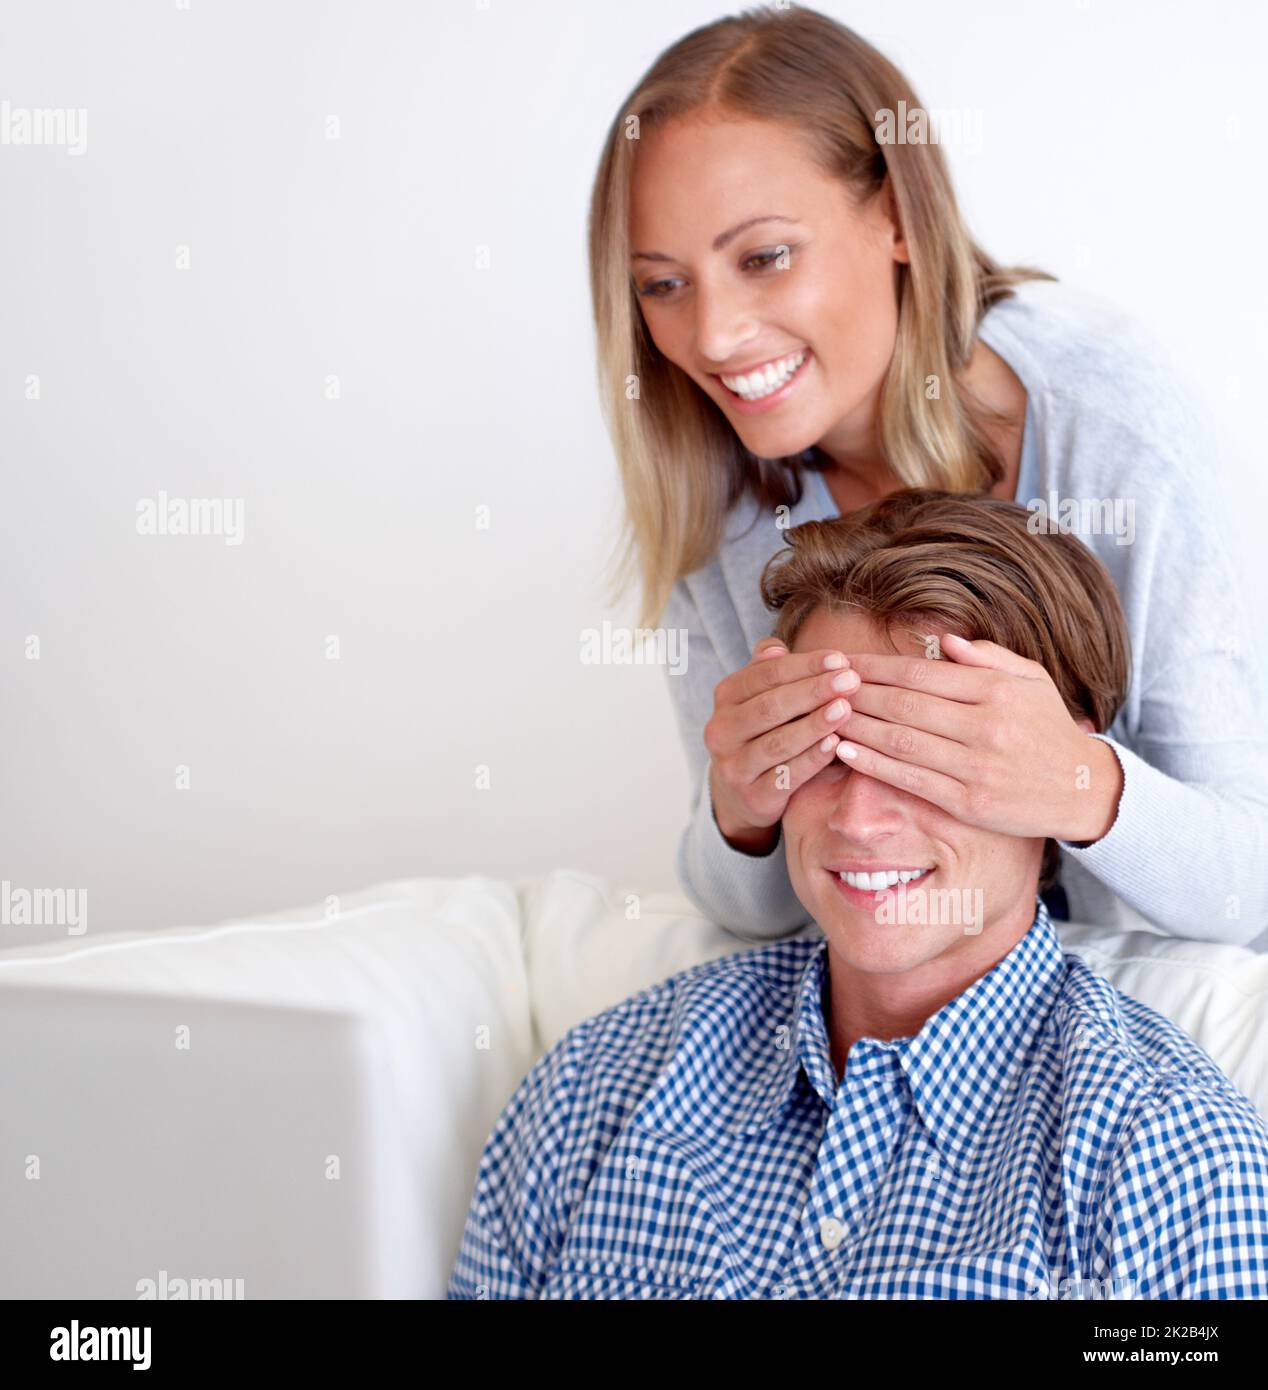 Guess who. A beautiful young woman covering her boyfriends eyes to surprise him. Stock Photo